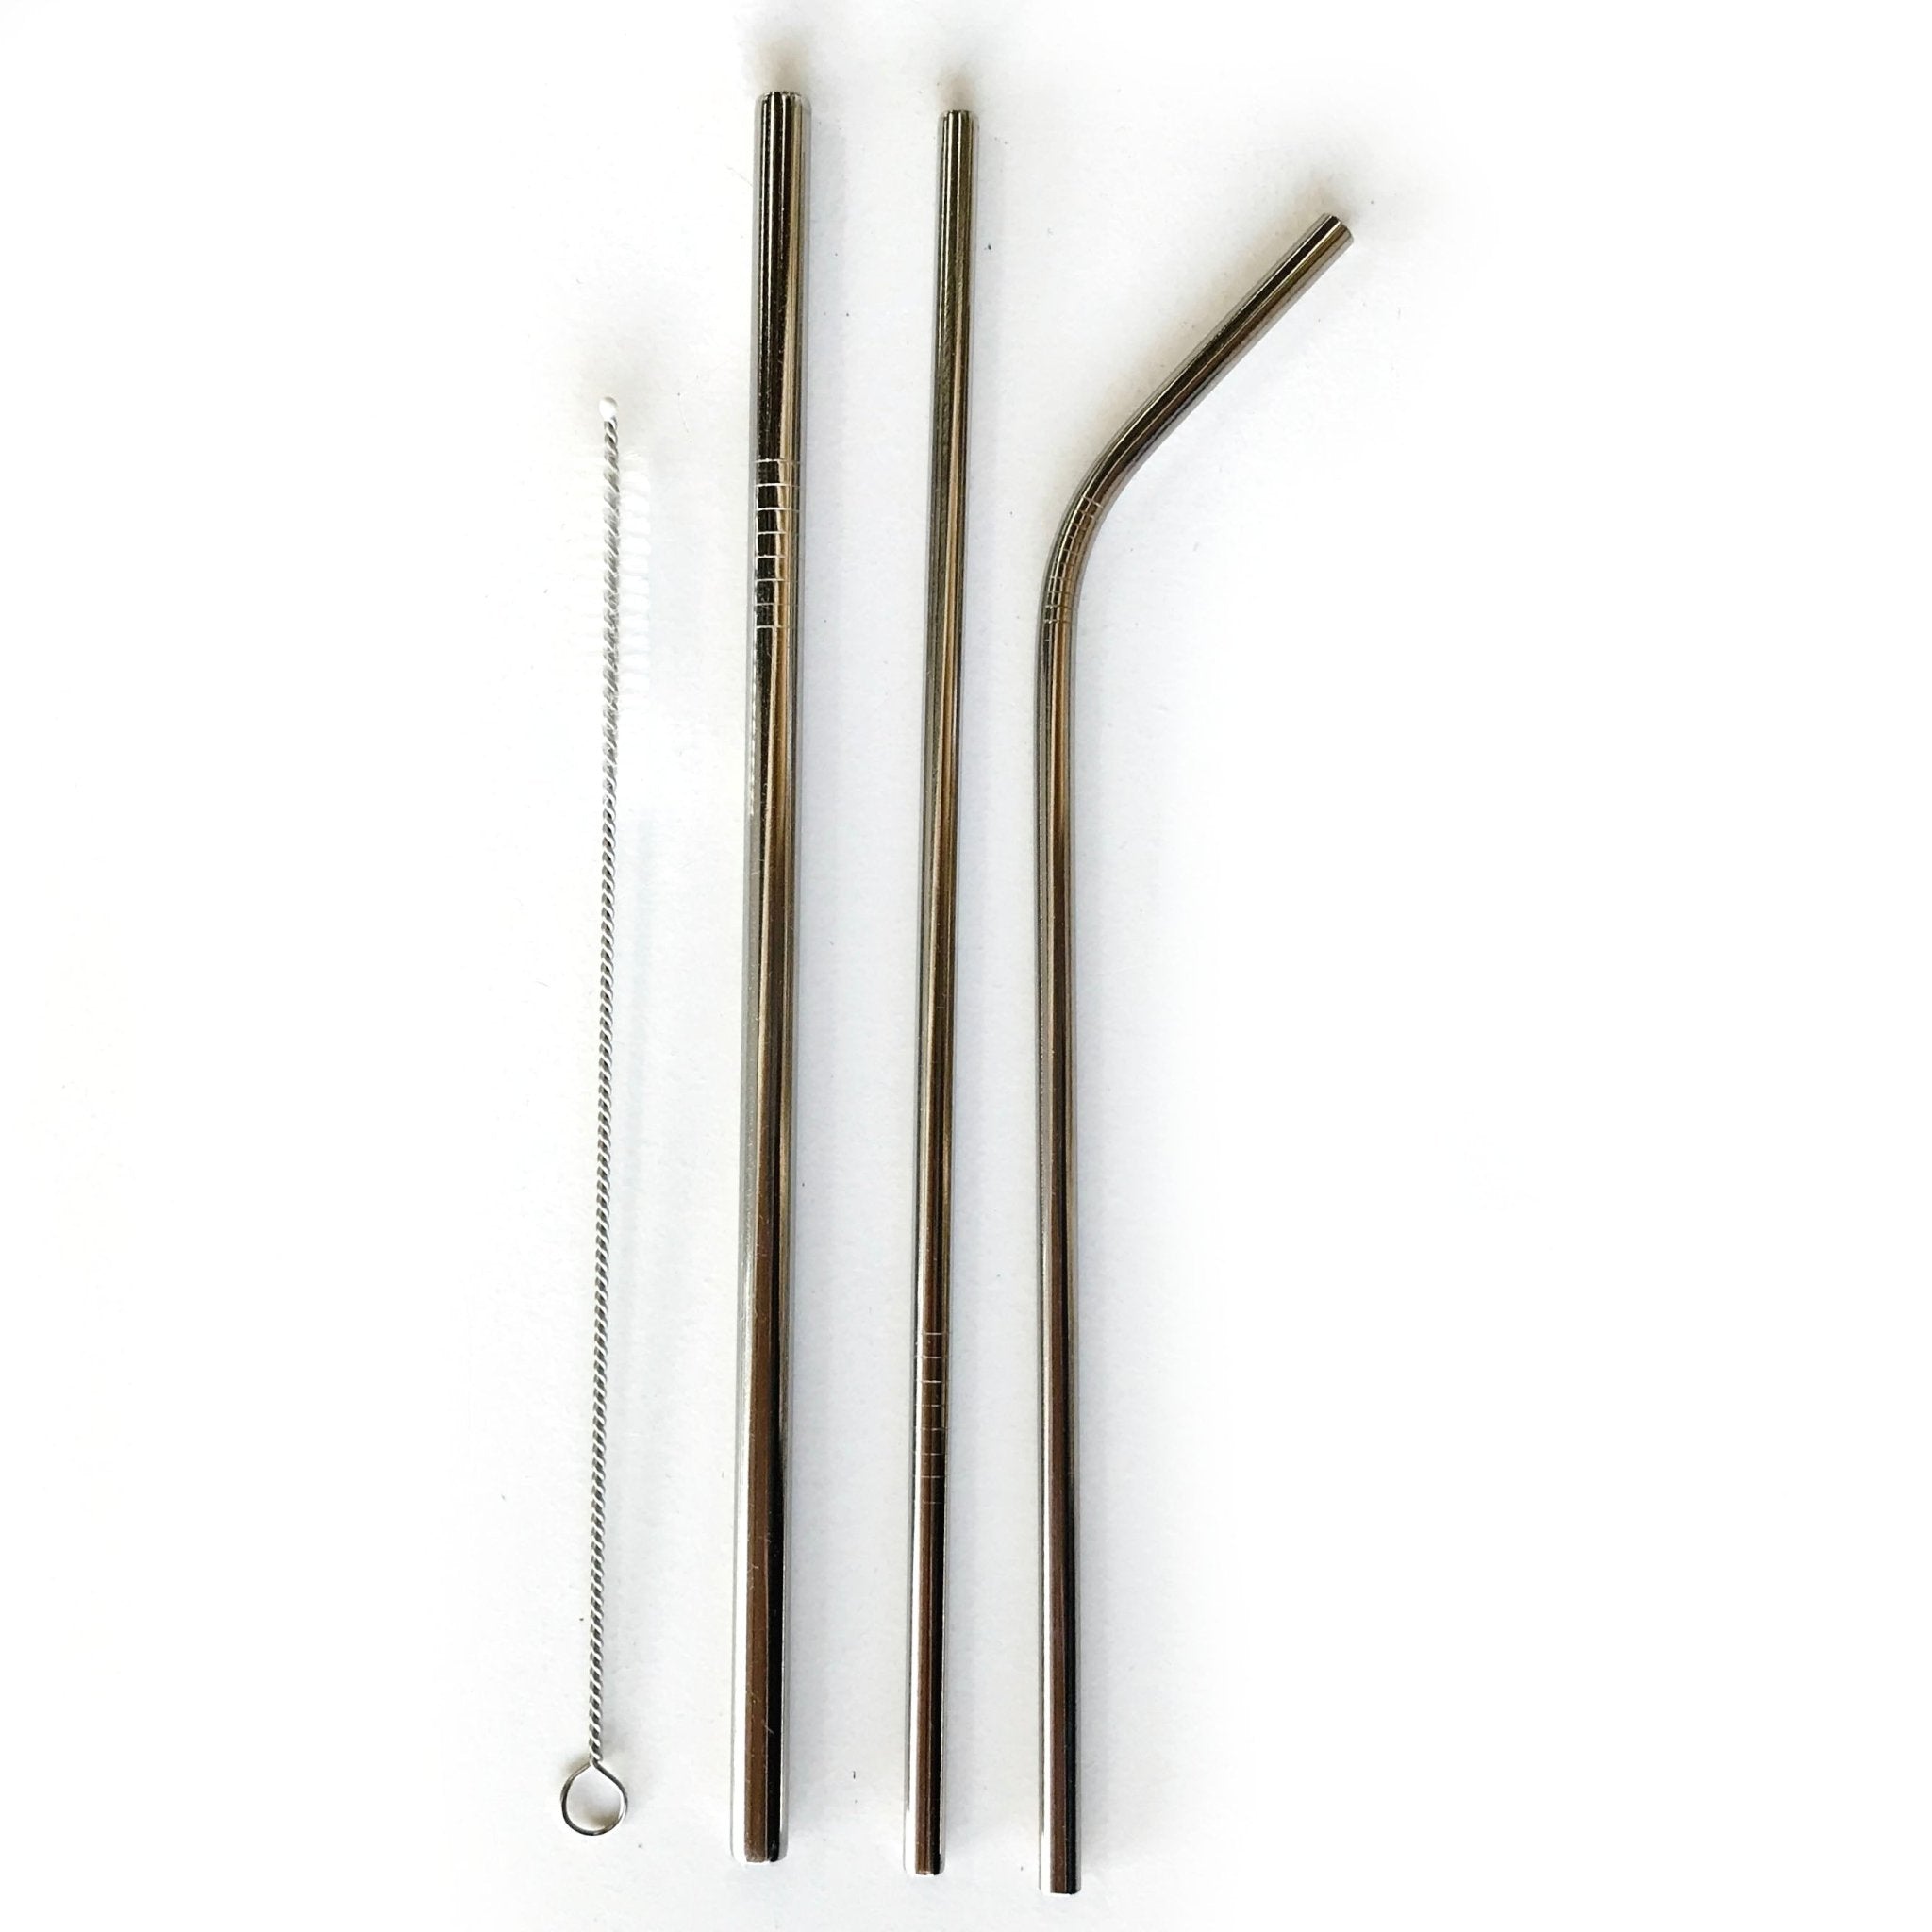 Simple MODERN 6 pack Reusable stainless steel straws